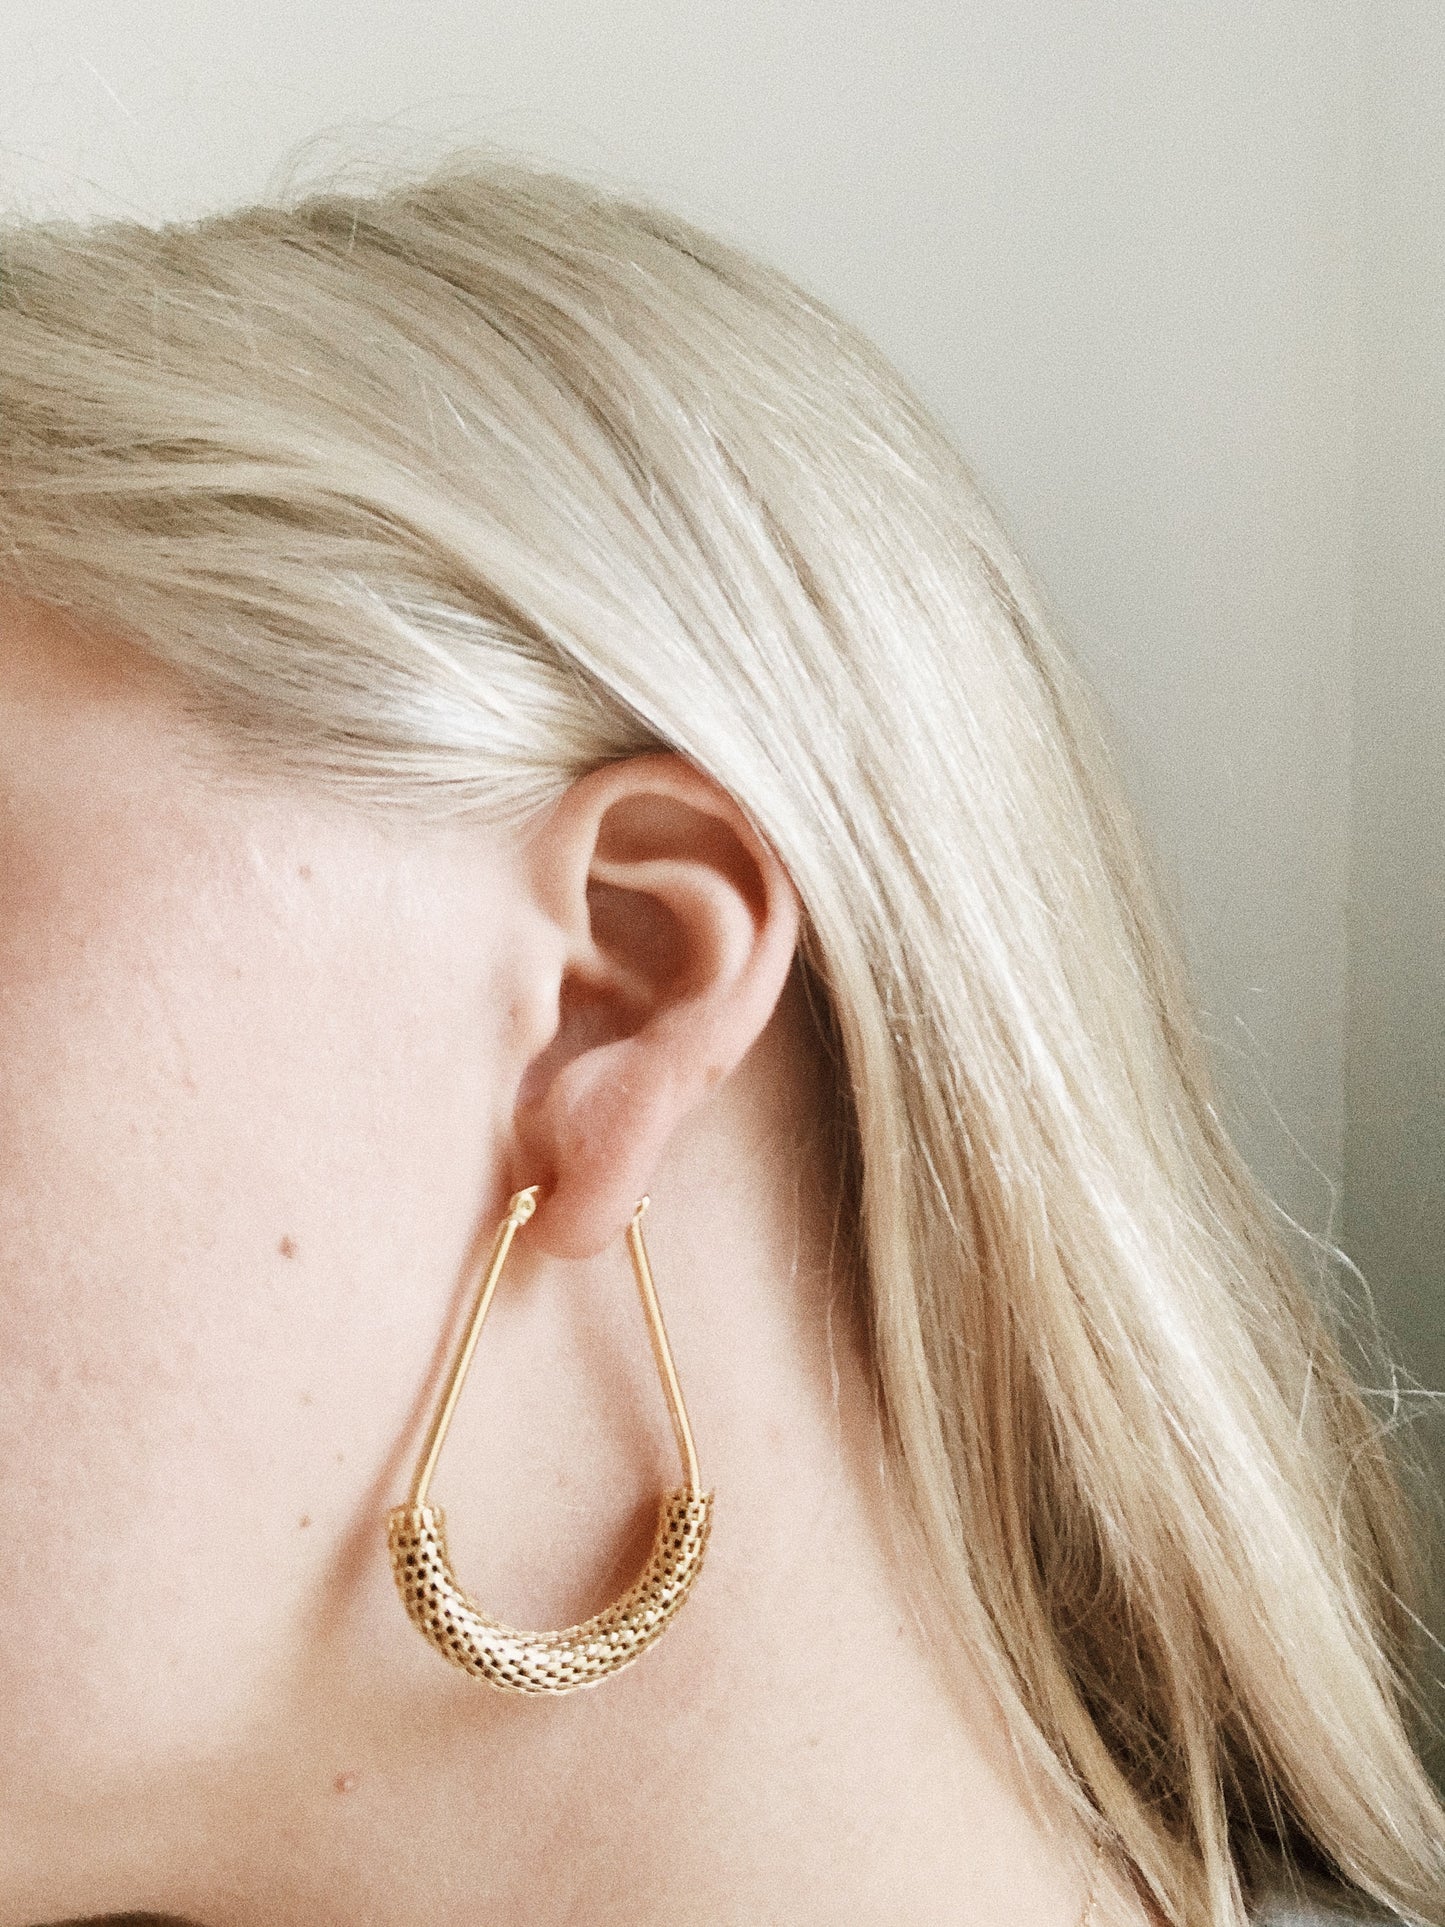 Gold hardware Mesh Uber Hoops | By: Life in the sun store